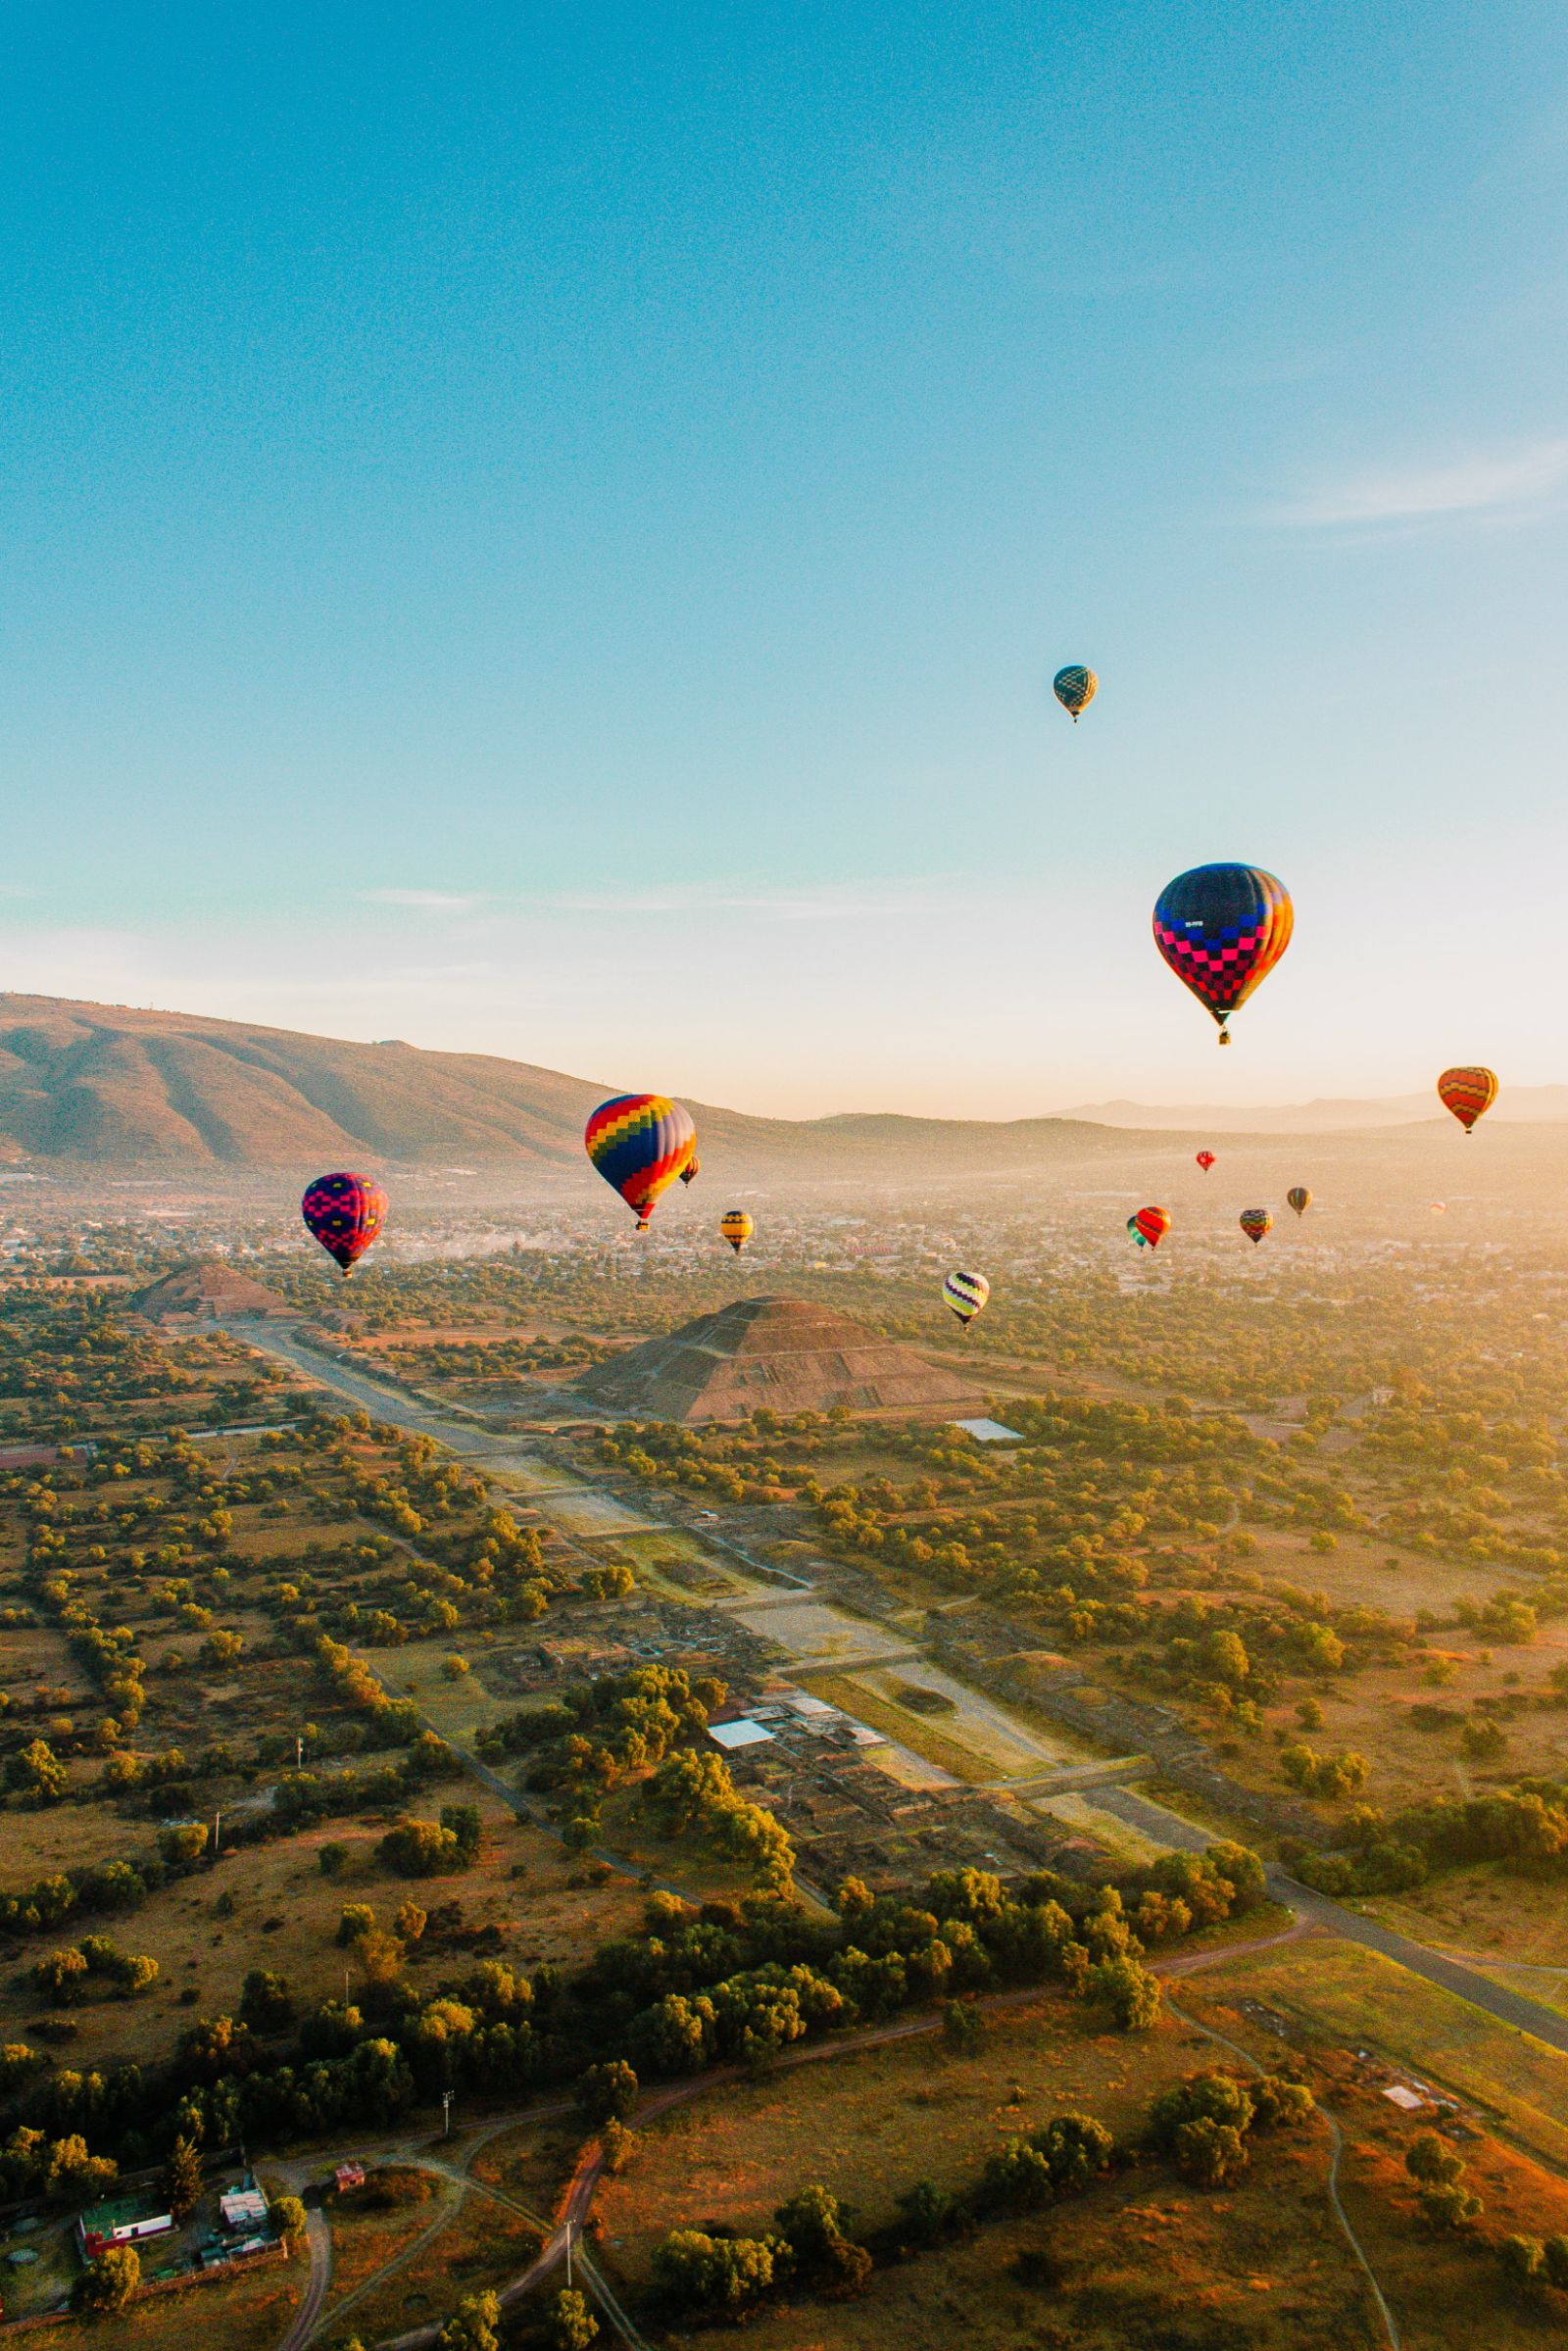 Hot air balloons over the Teotihuacan ruins in Mexico